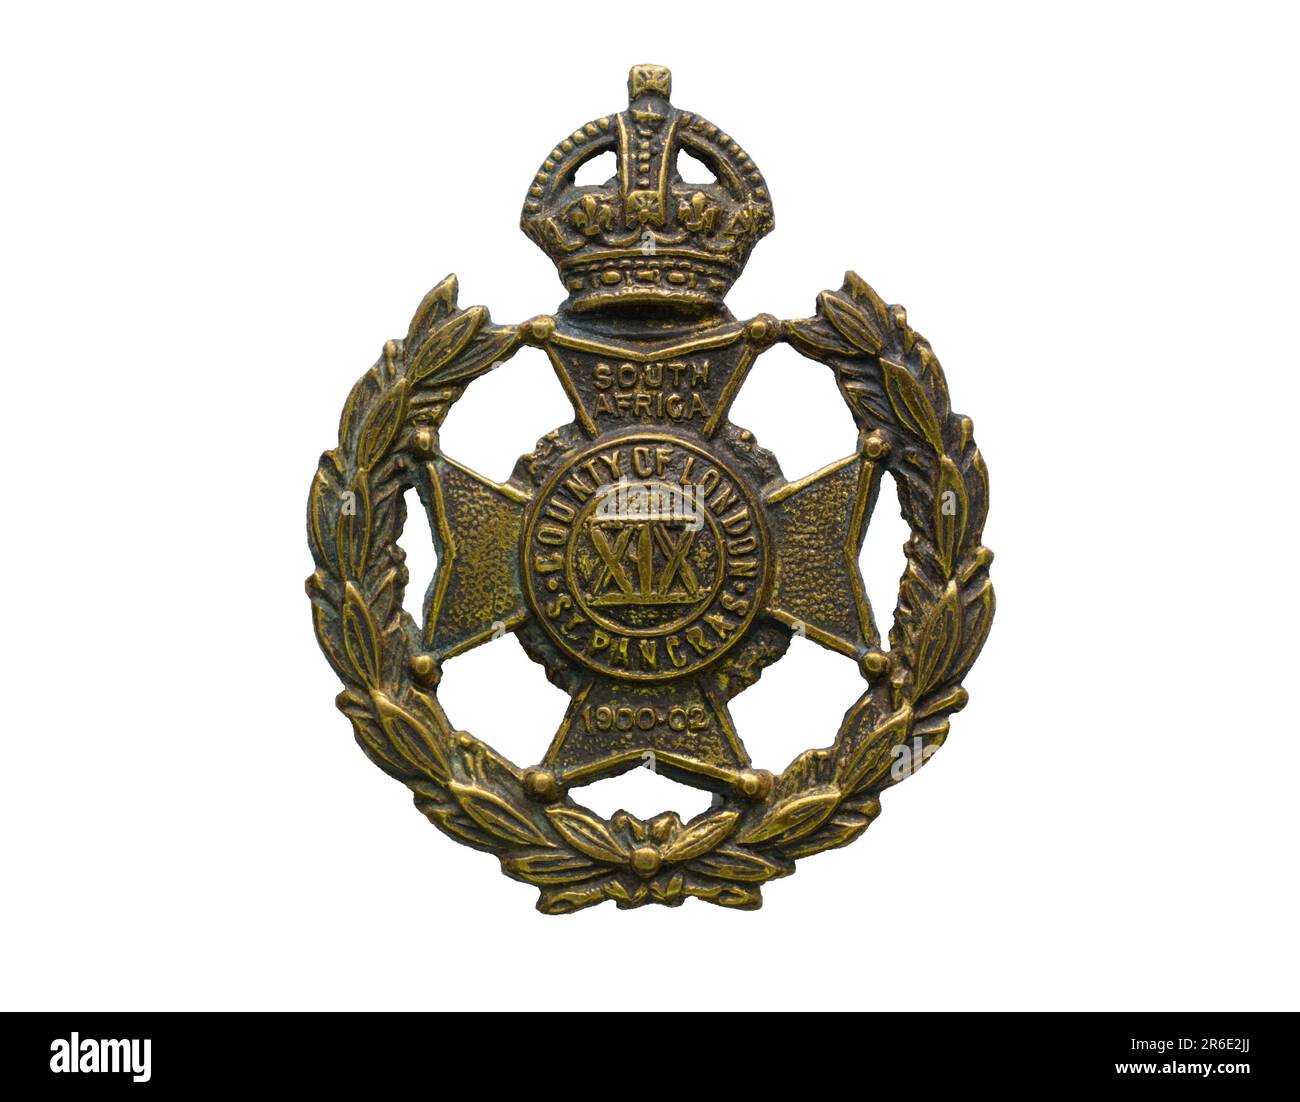 A cap badge of the 19th (County of London) Battalion, London Regiment (St Pancras) as issued c.1901-1935. Stock Photo